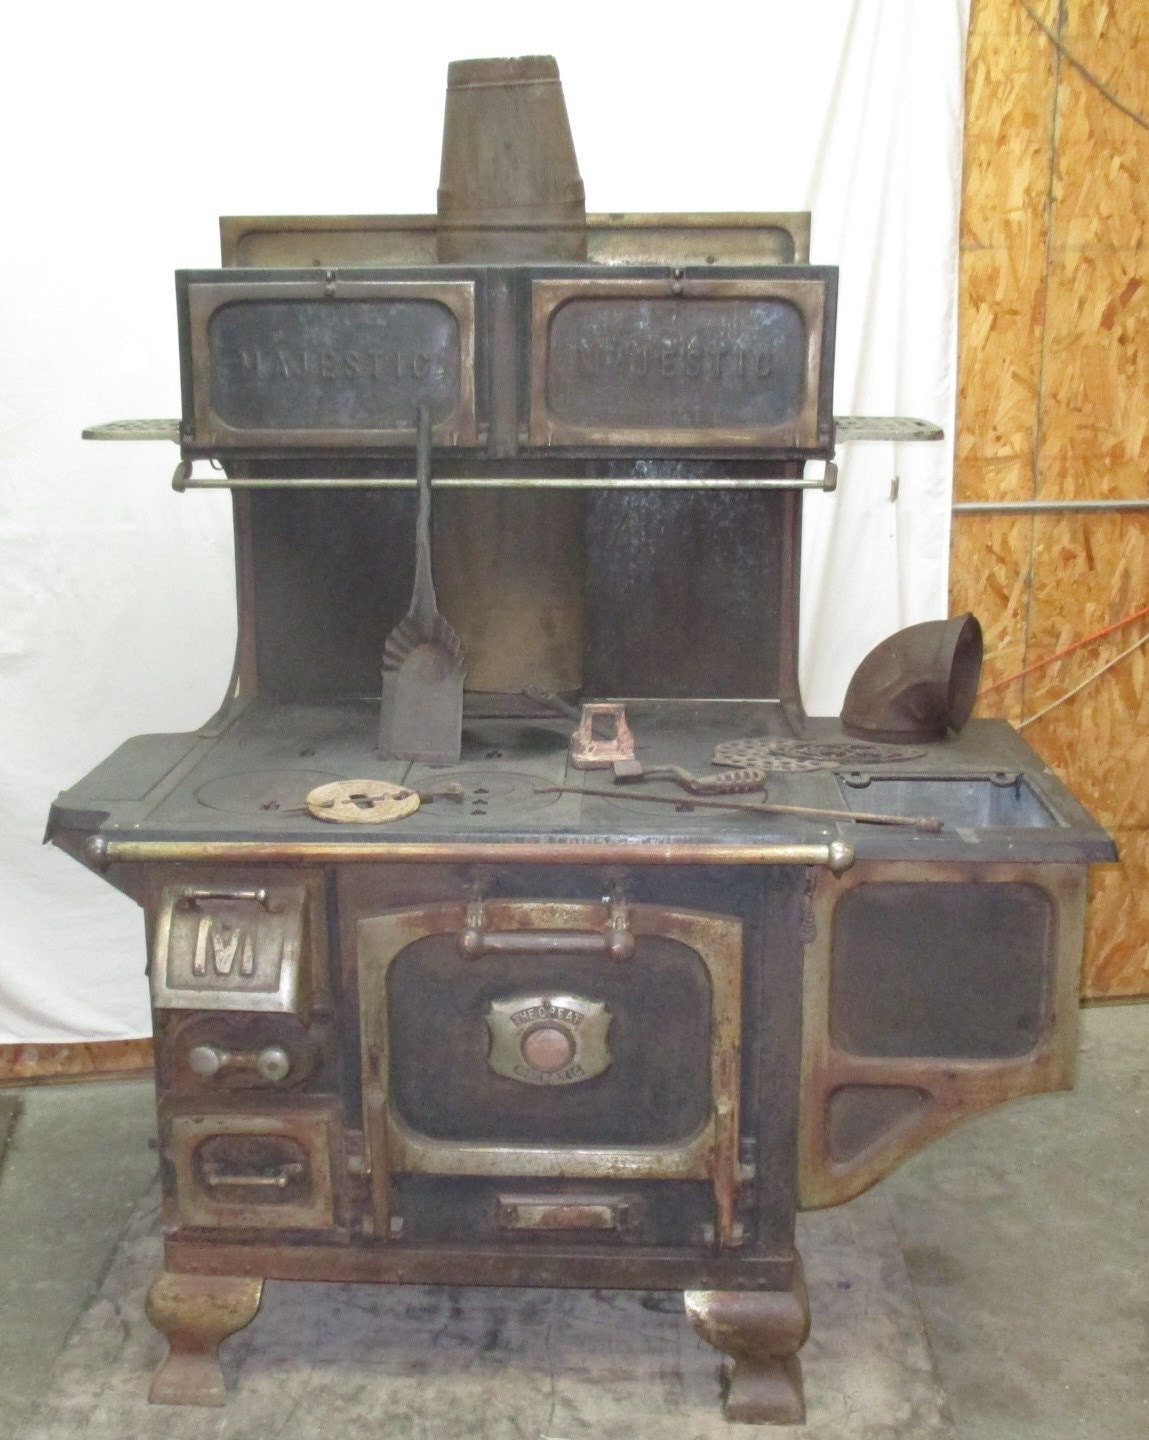  Antique Wood Burning Cook Stove for Simple Design